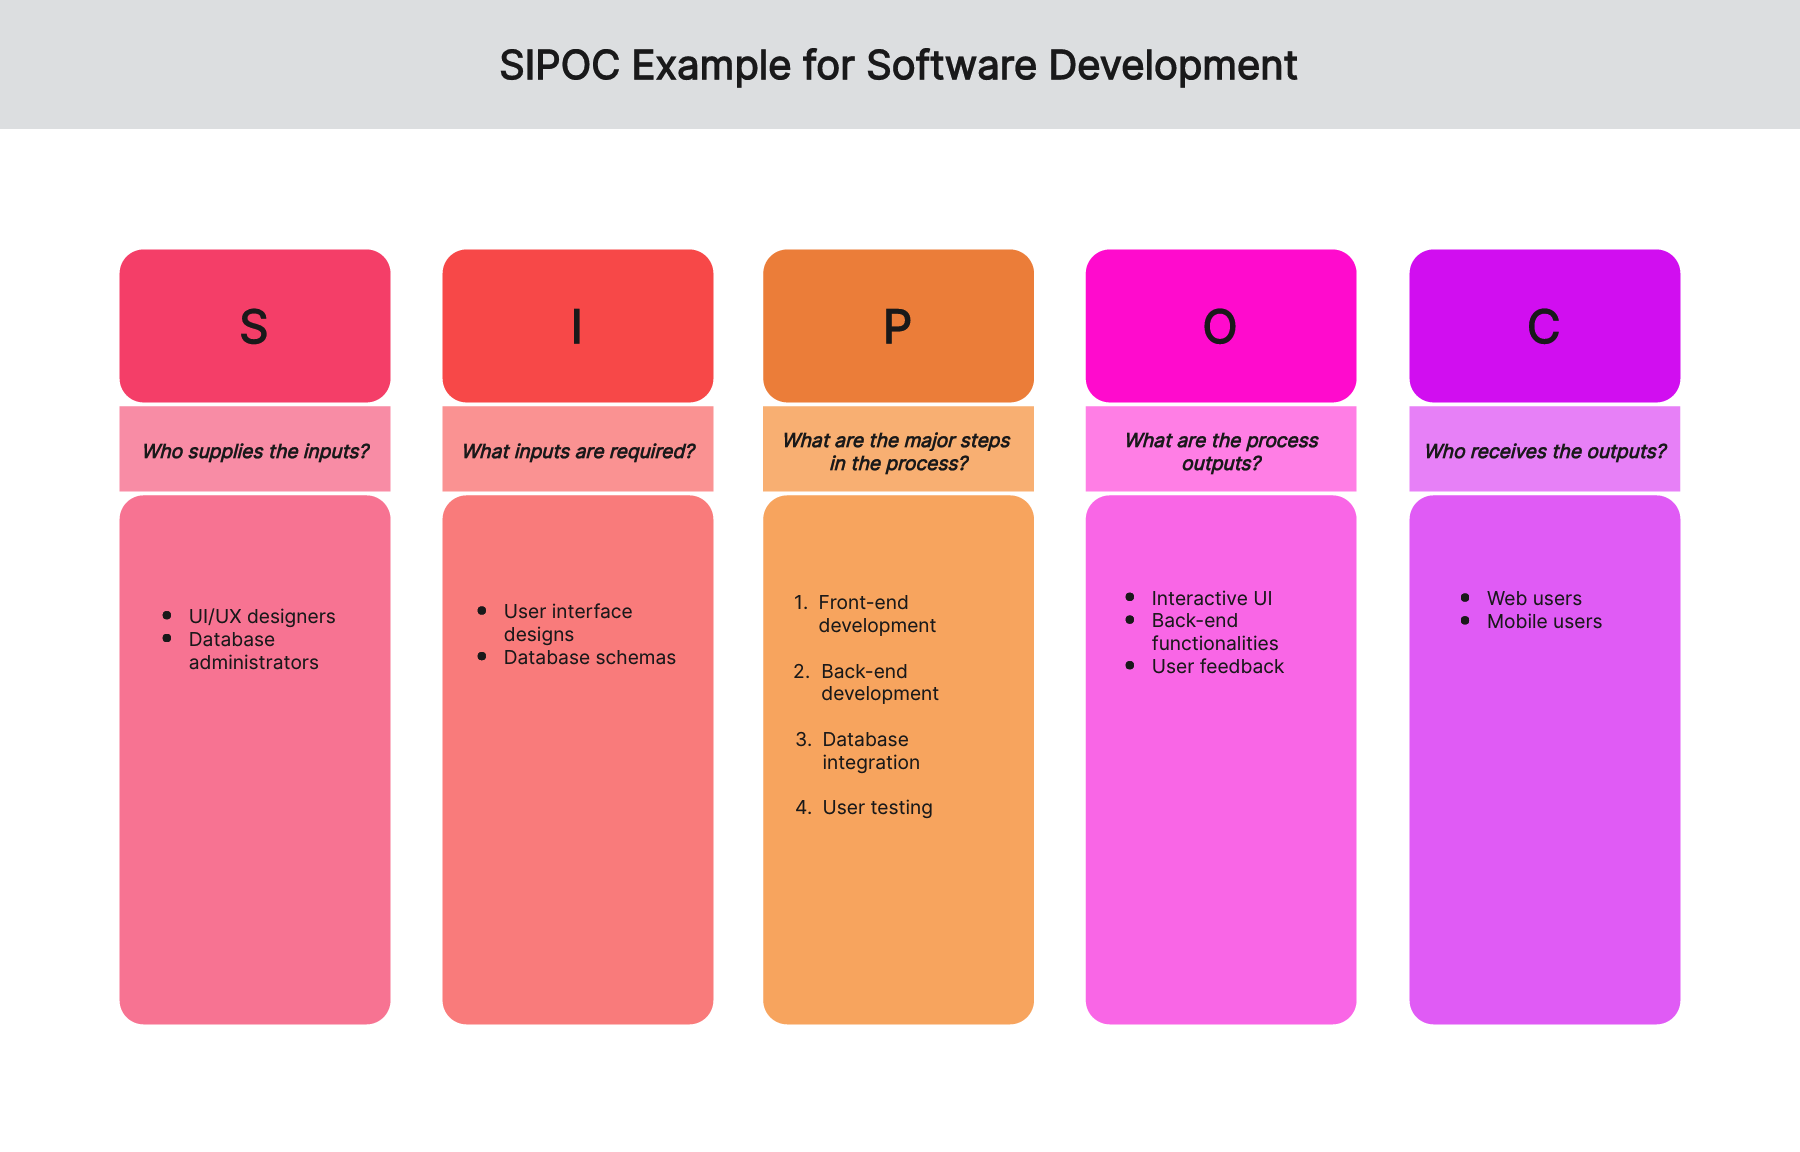 sipoc-examples-software-development-02